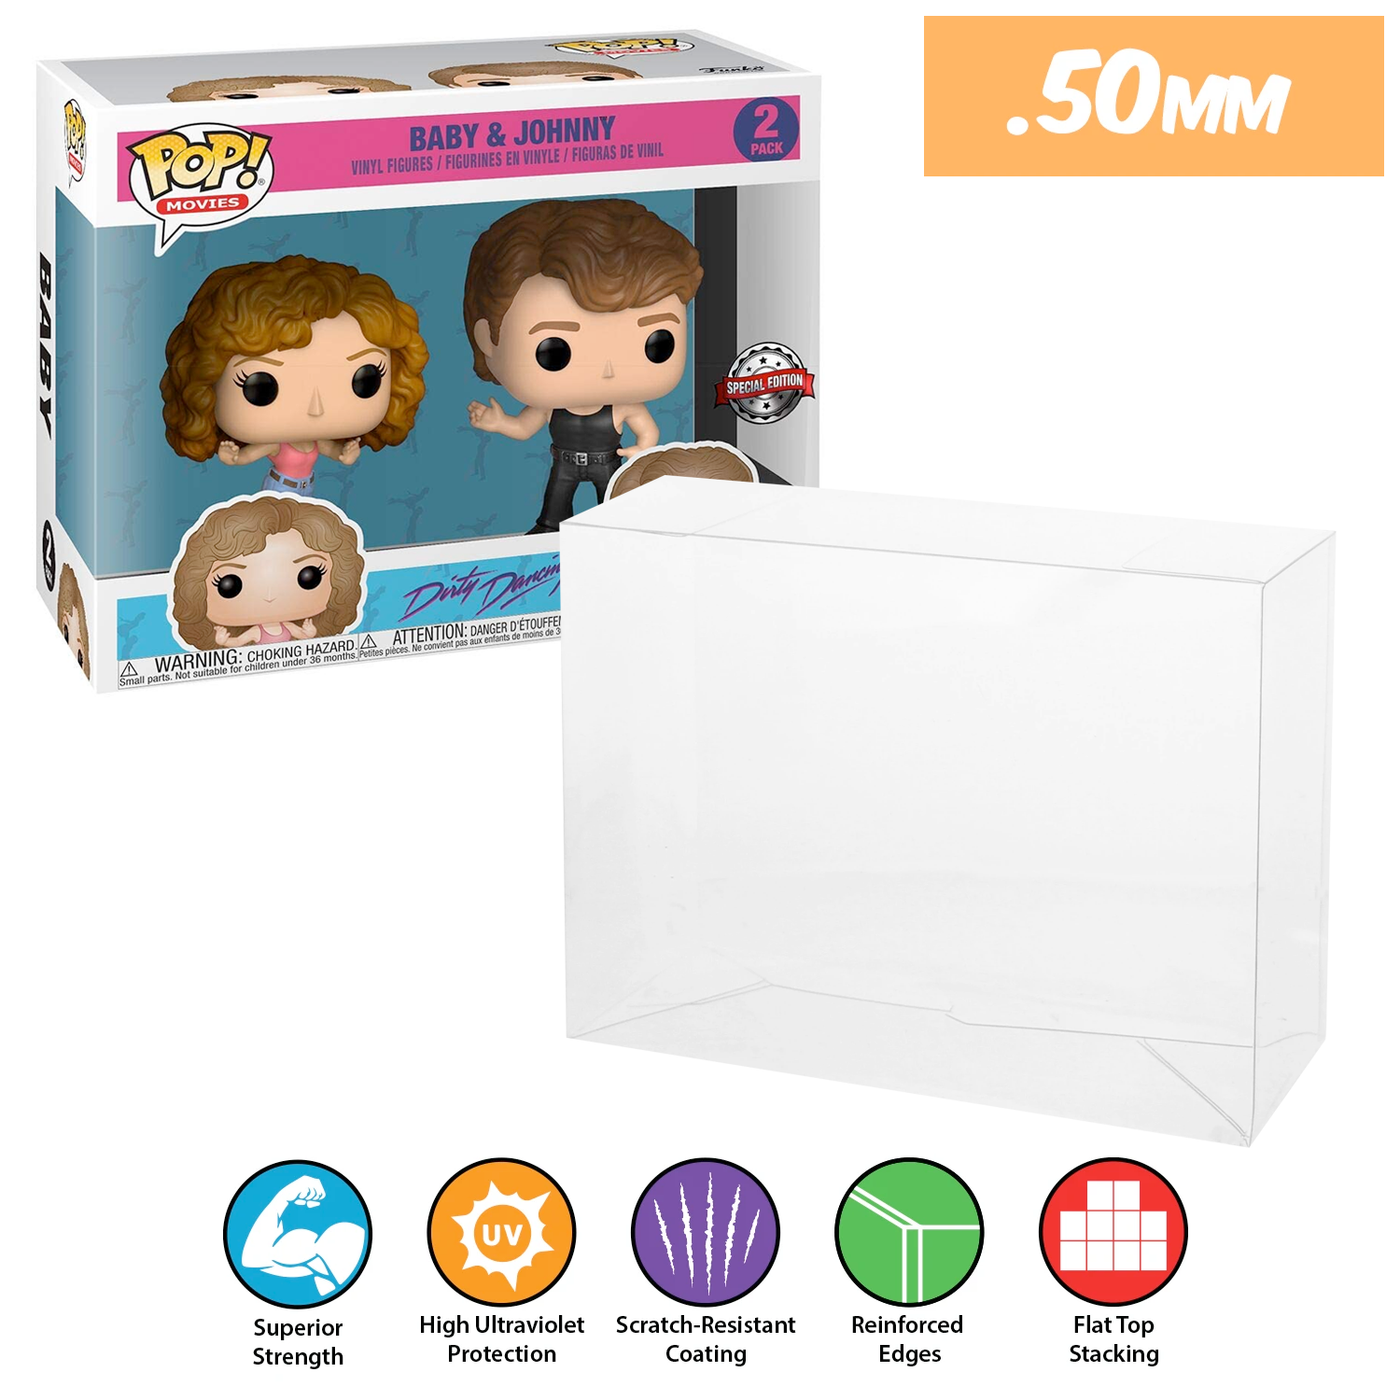 baby johnny 2 pack best funko pop protectors thick strong uv scratch flat top stack vinyl display geek plastic shield vaulted eco armor fits collect protect display case kollector protector